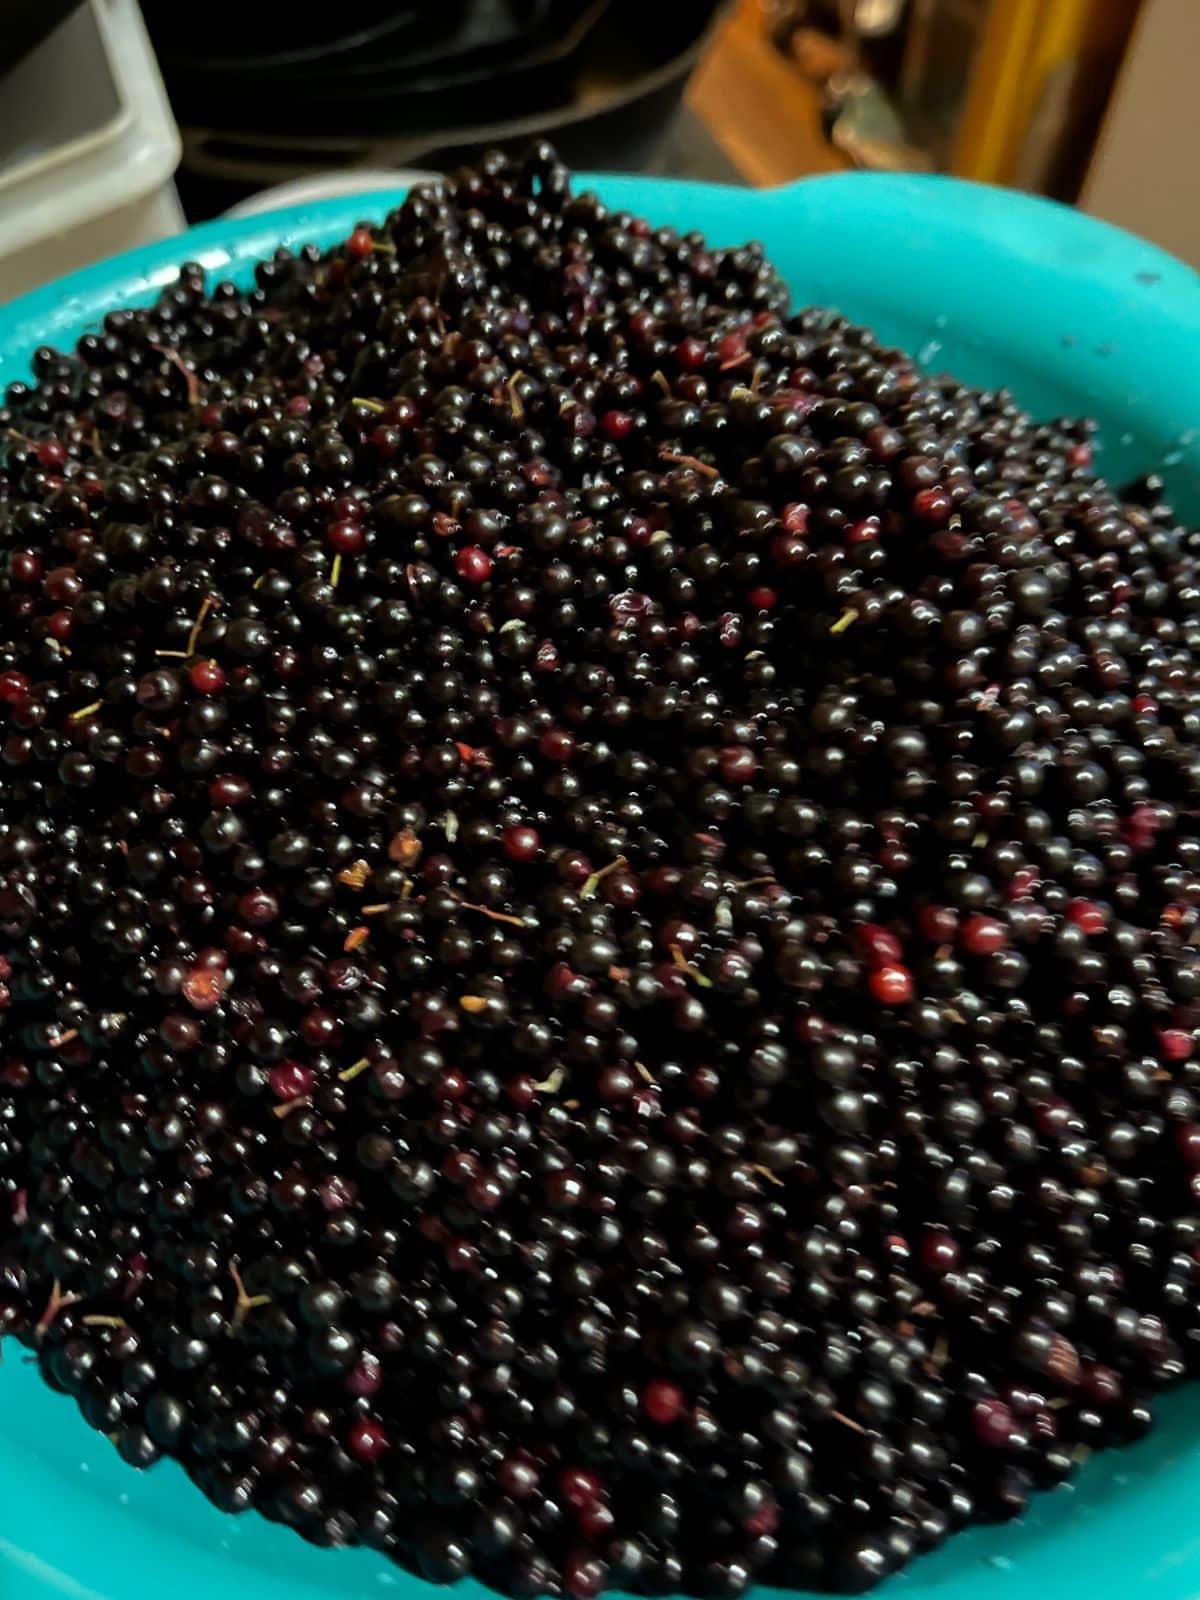 A colander filled with cleaned elderberries